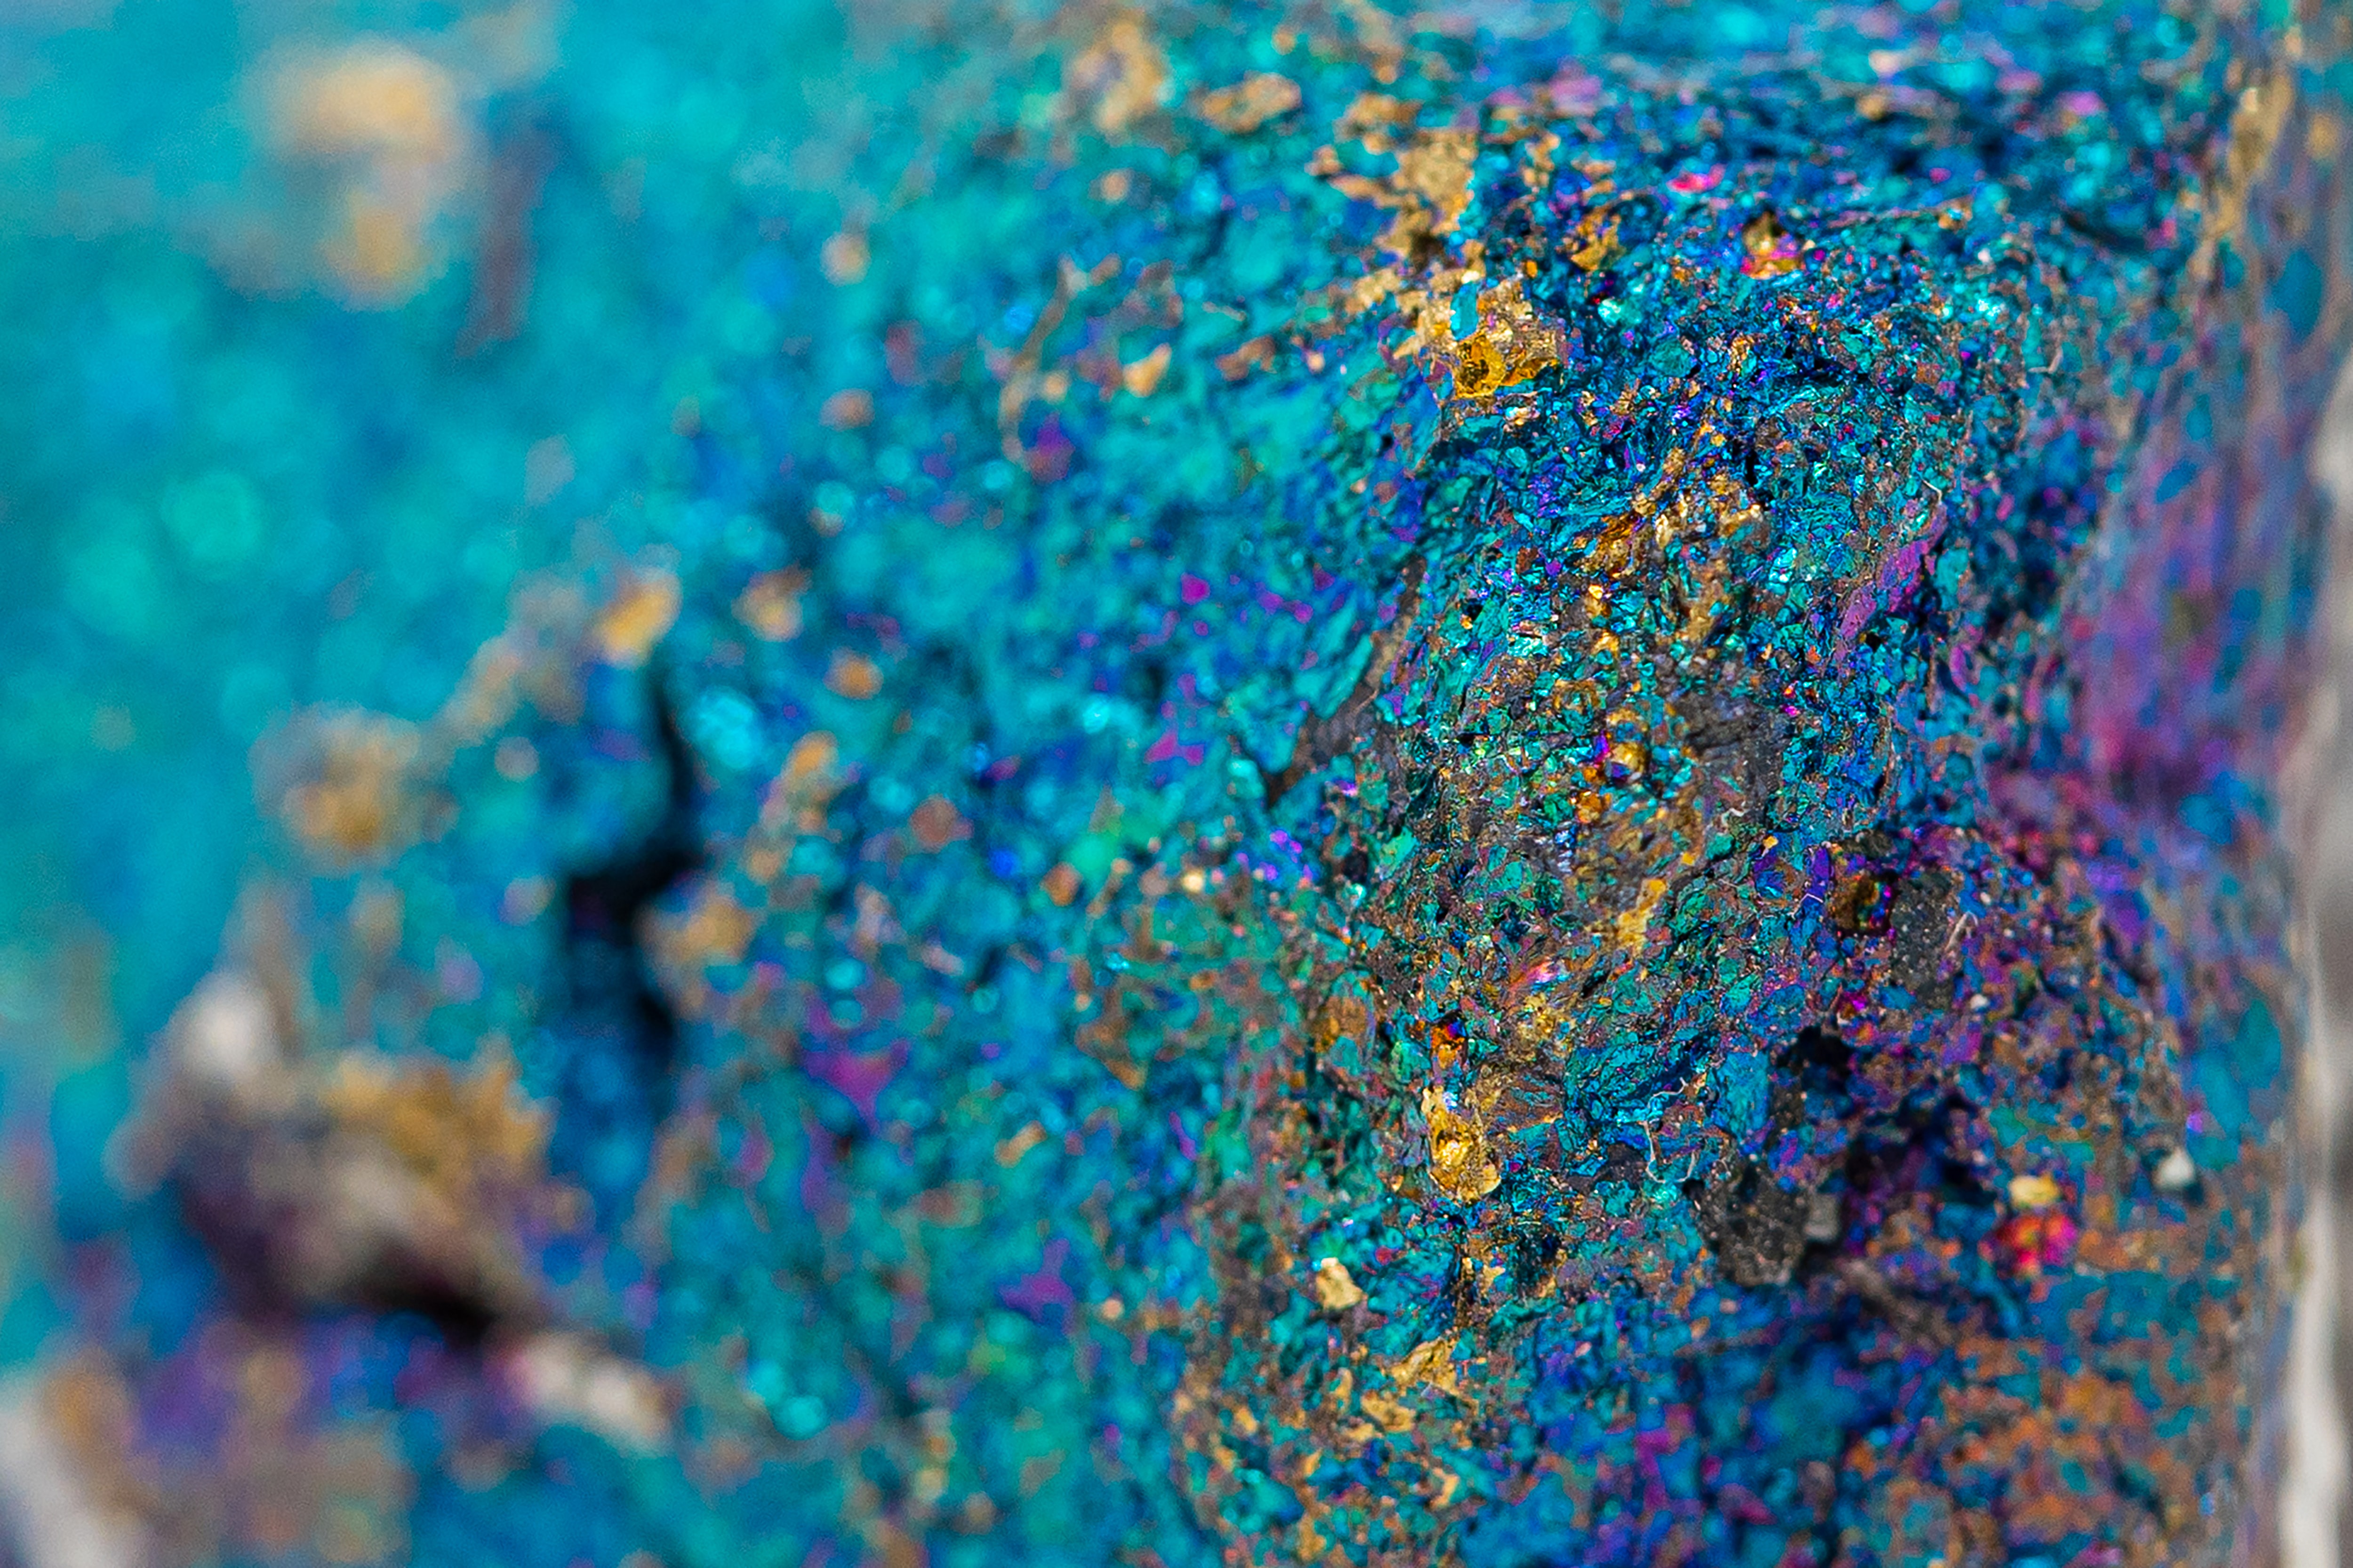 stains, motley, abstract, multicolored, paint, spots iphone wallpaper